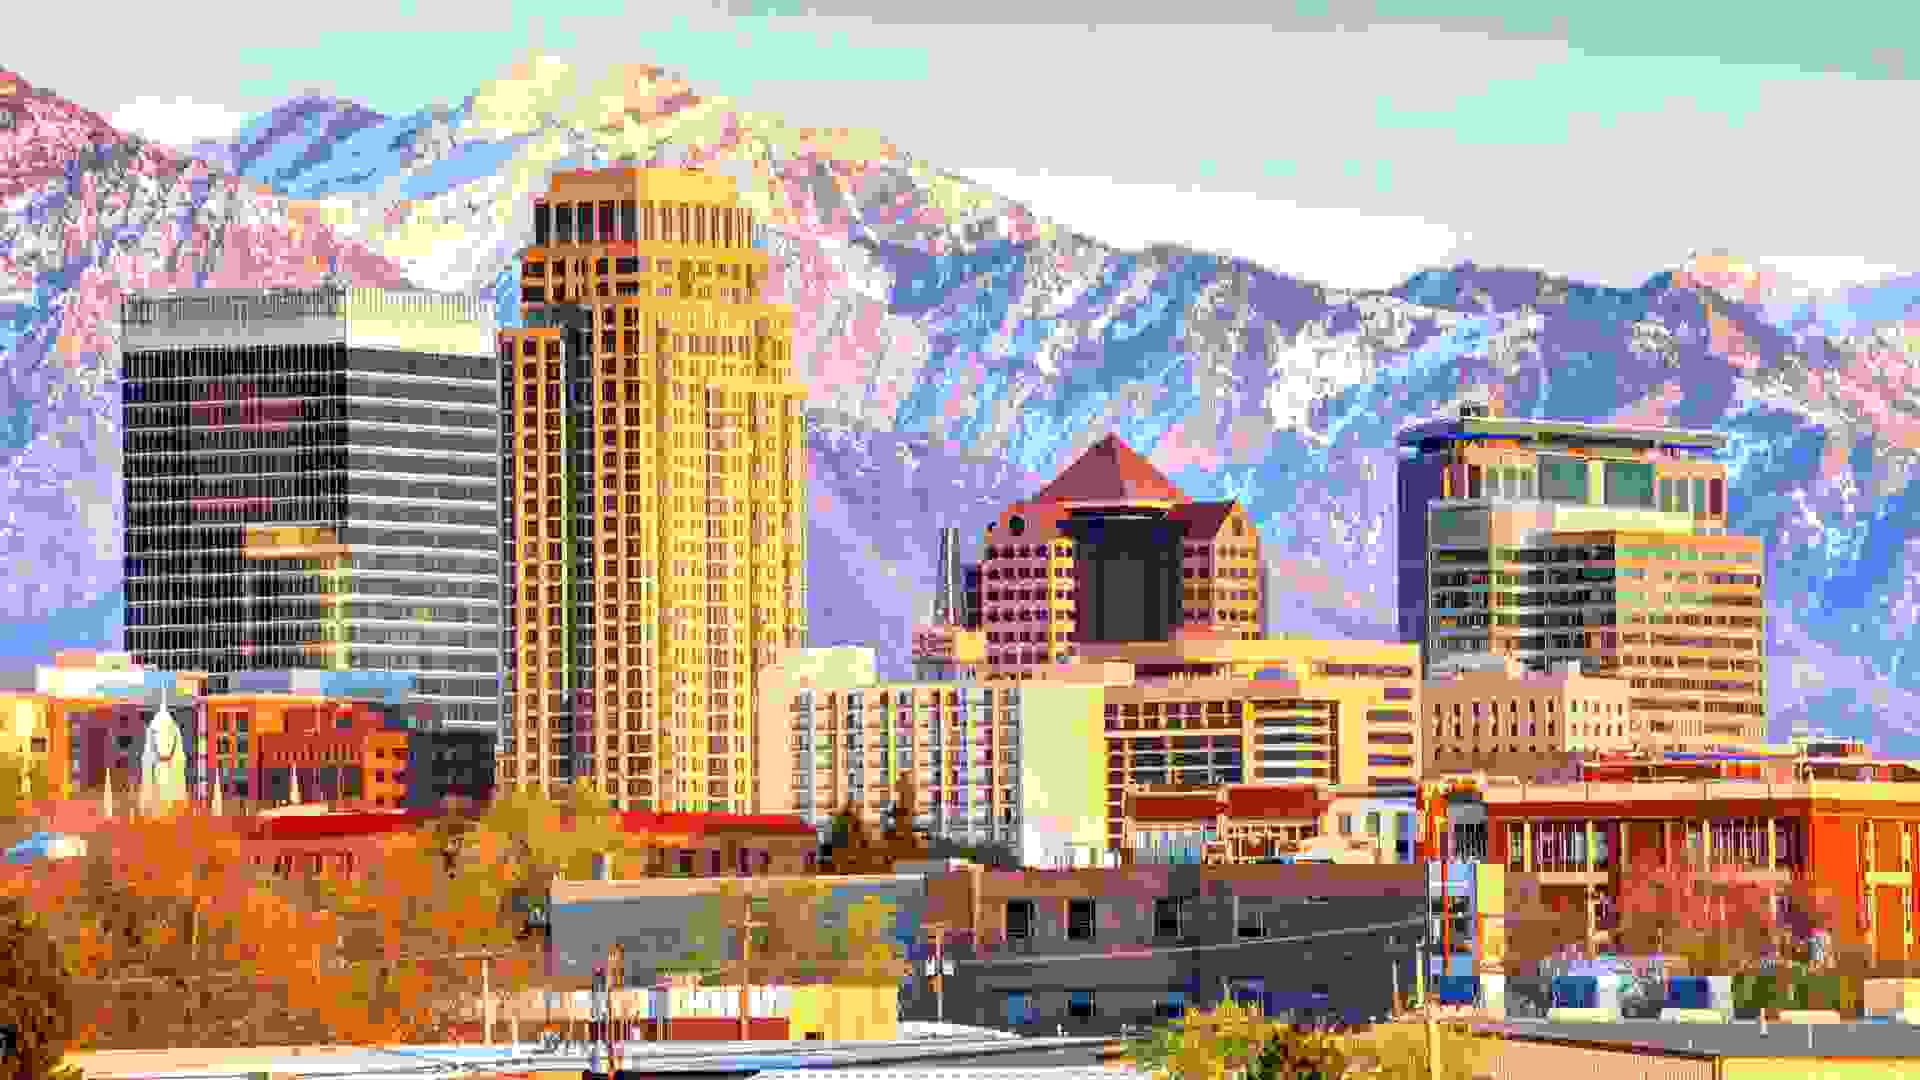 Salt Lake City is the capital and the most populous municipality of the U.